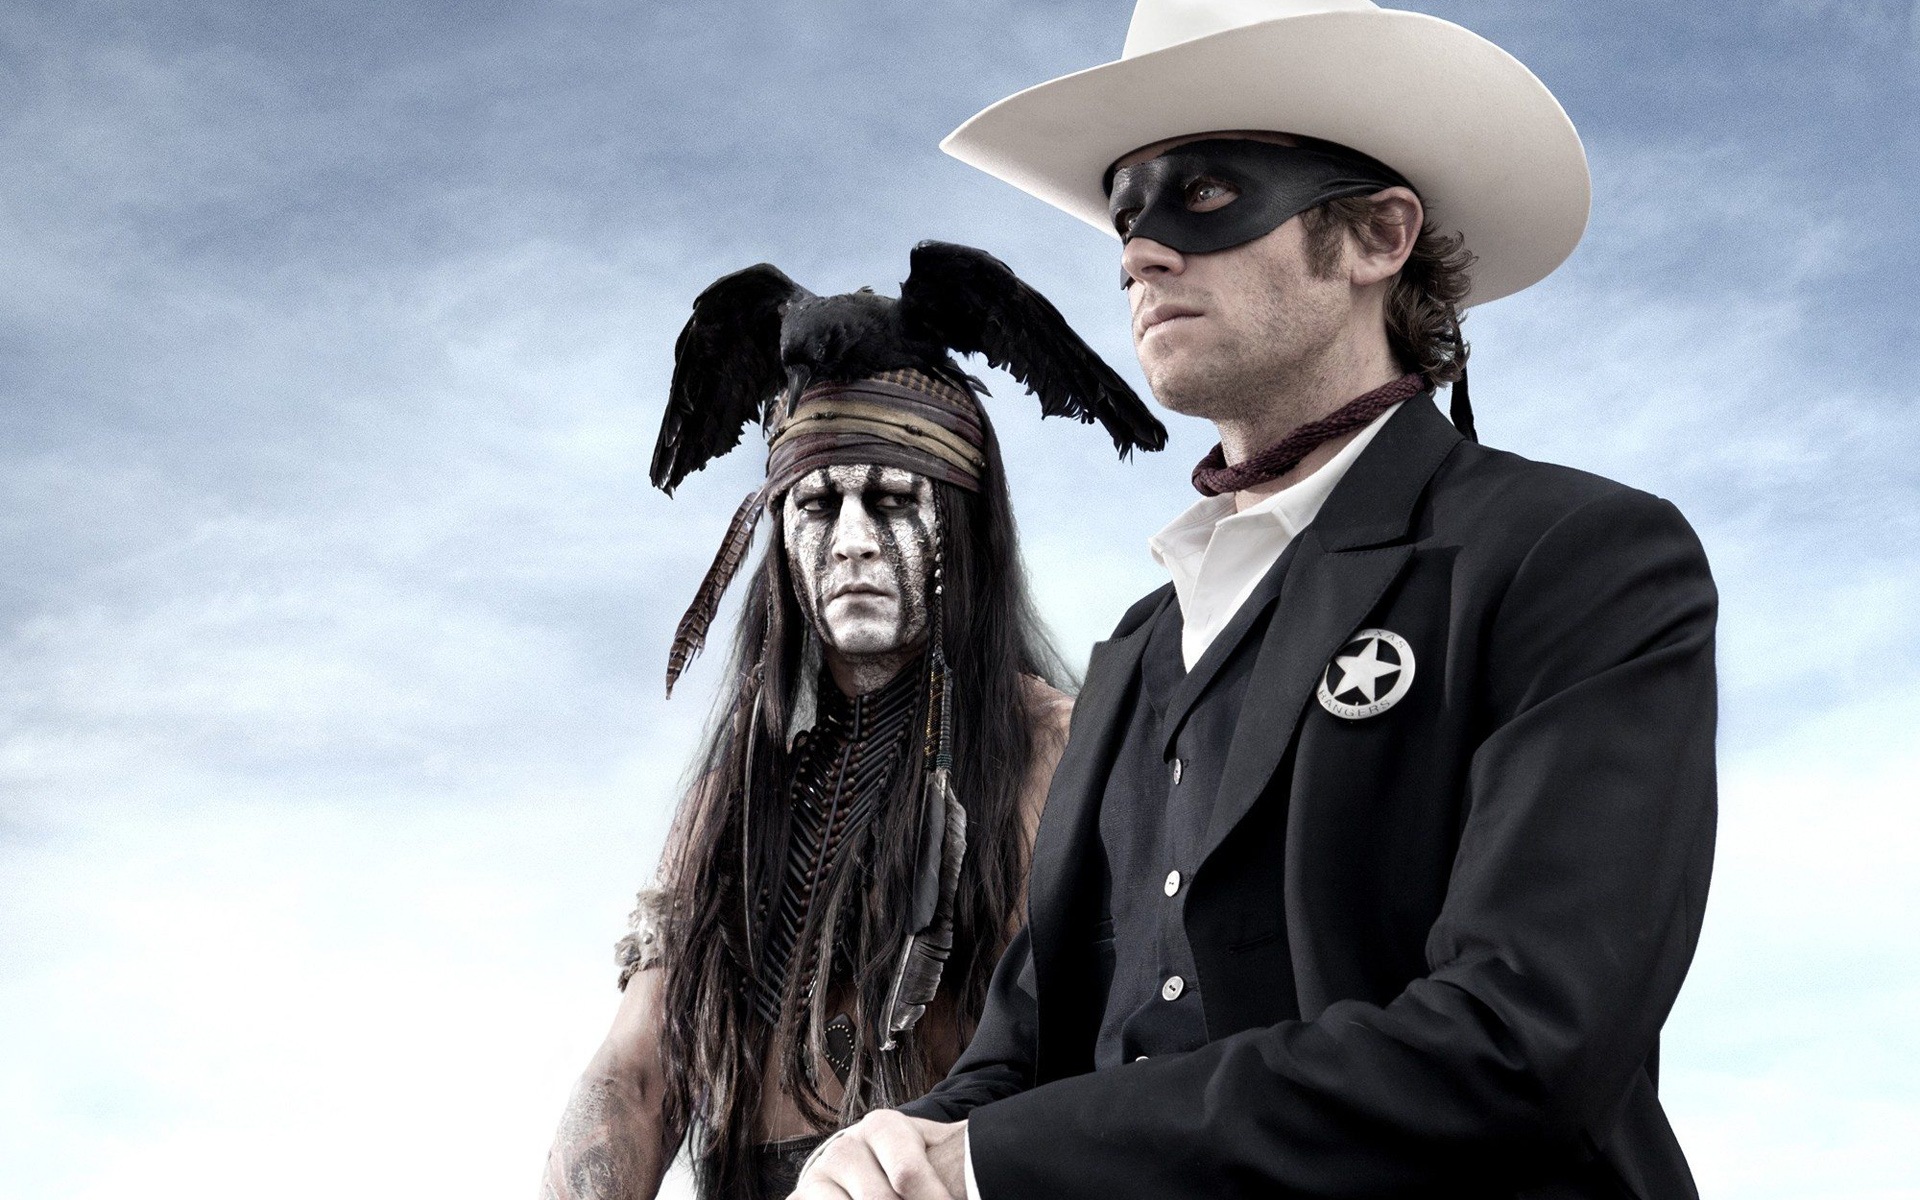 The Lone Ranger HD movie wallpapers #2 - 1920x1200